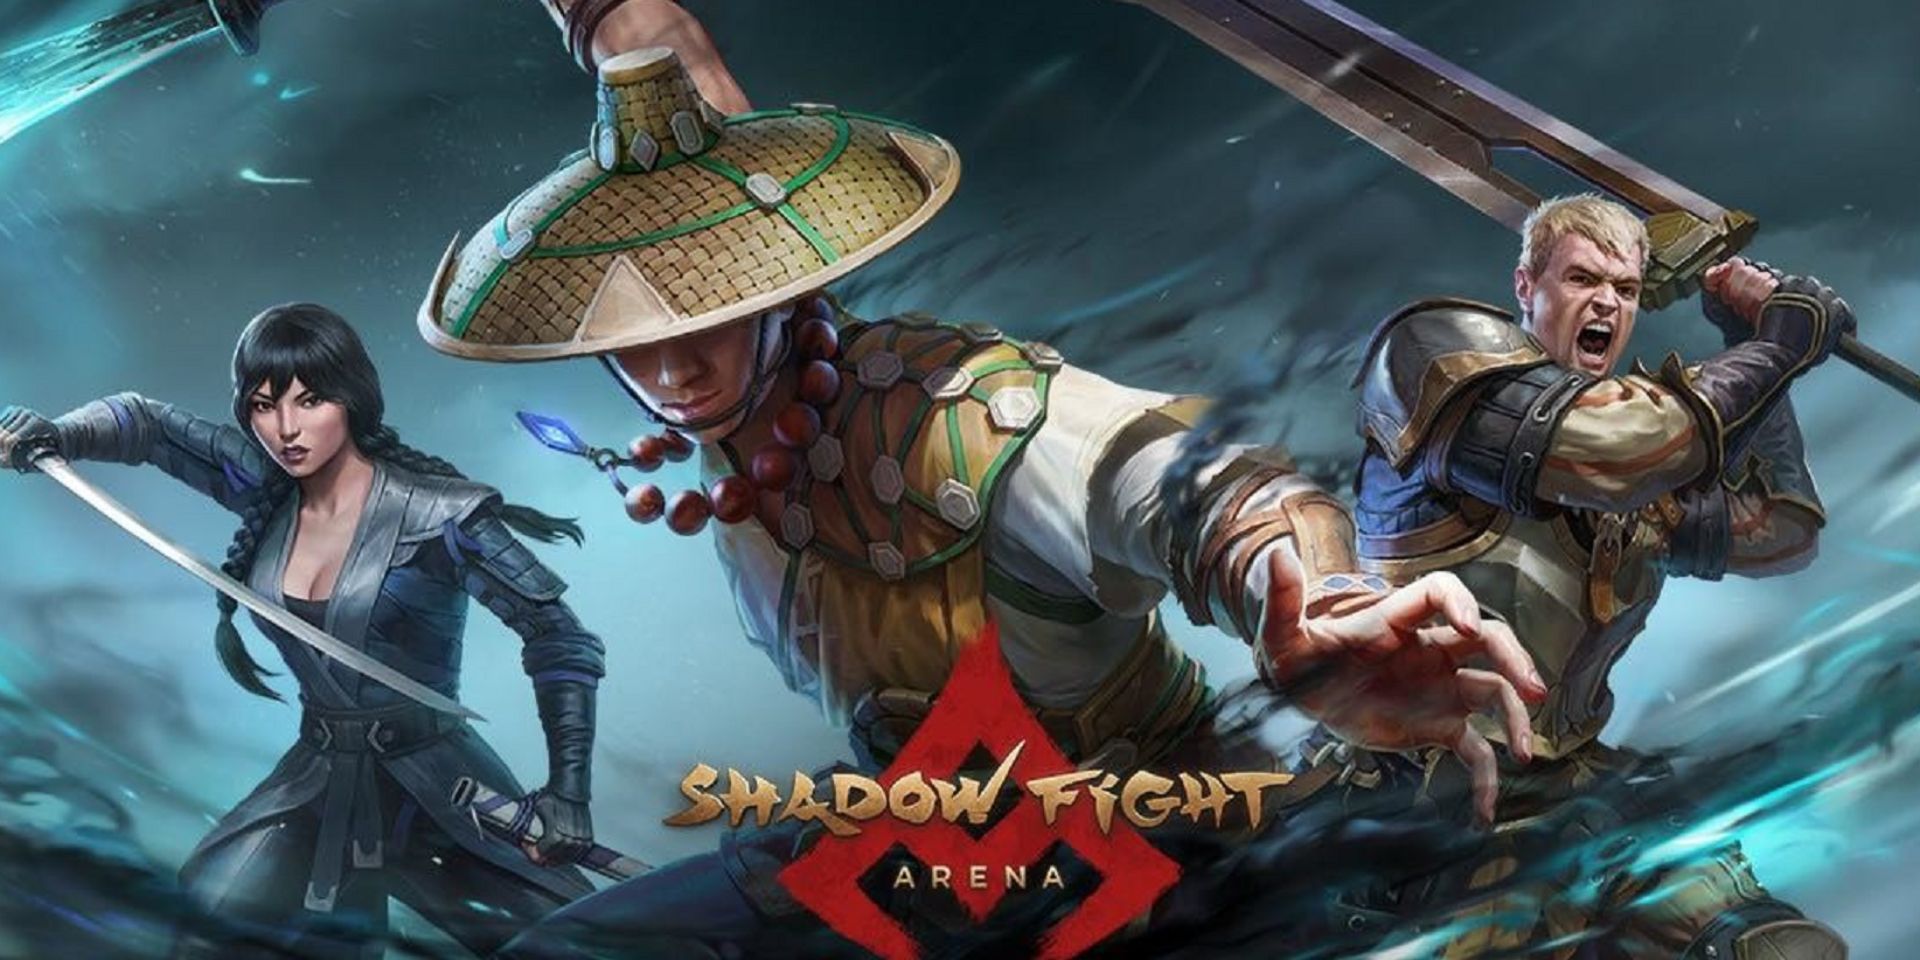 A picture from Shadow Fight 4 Arena